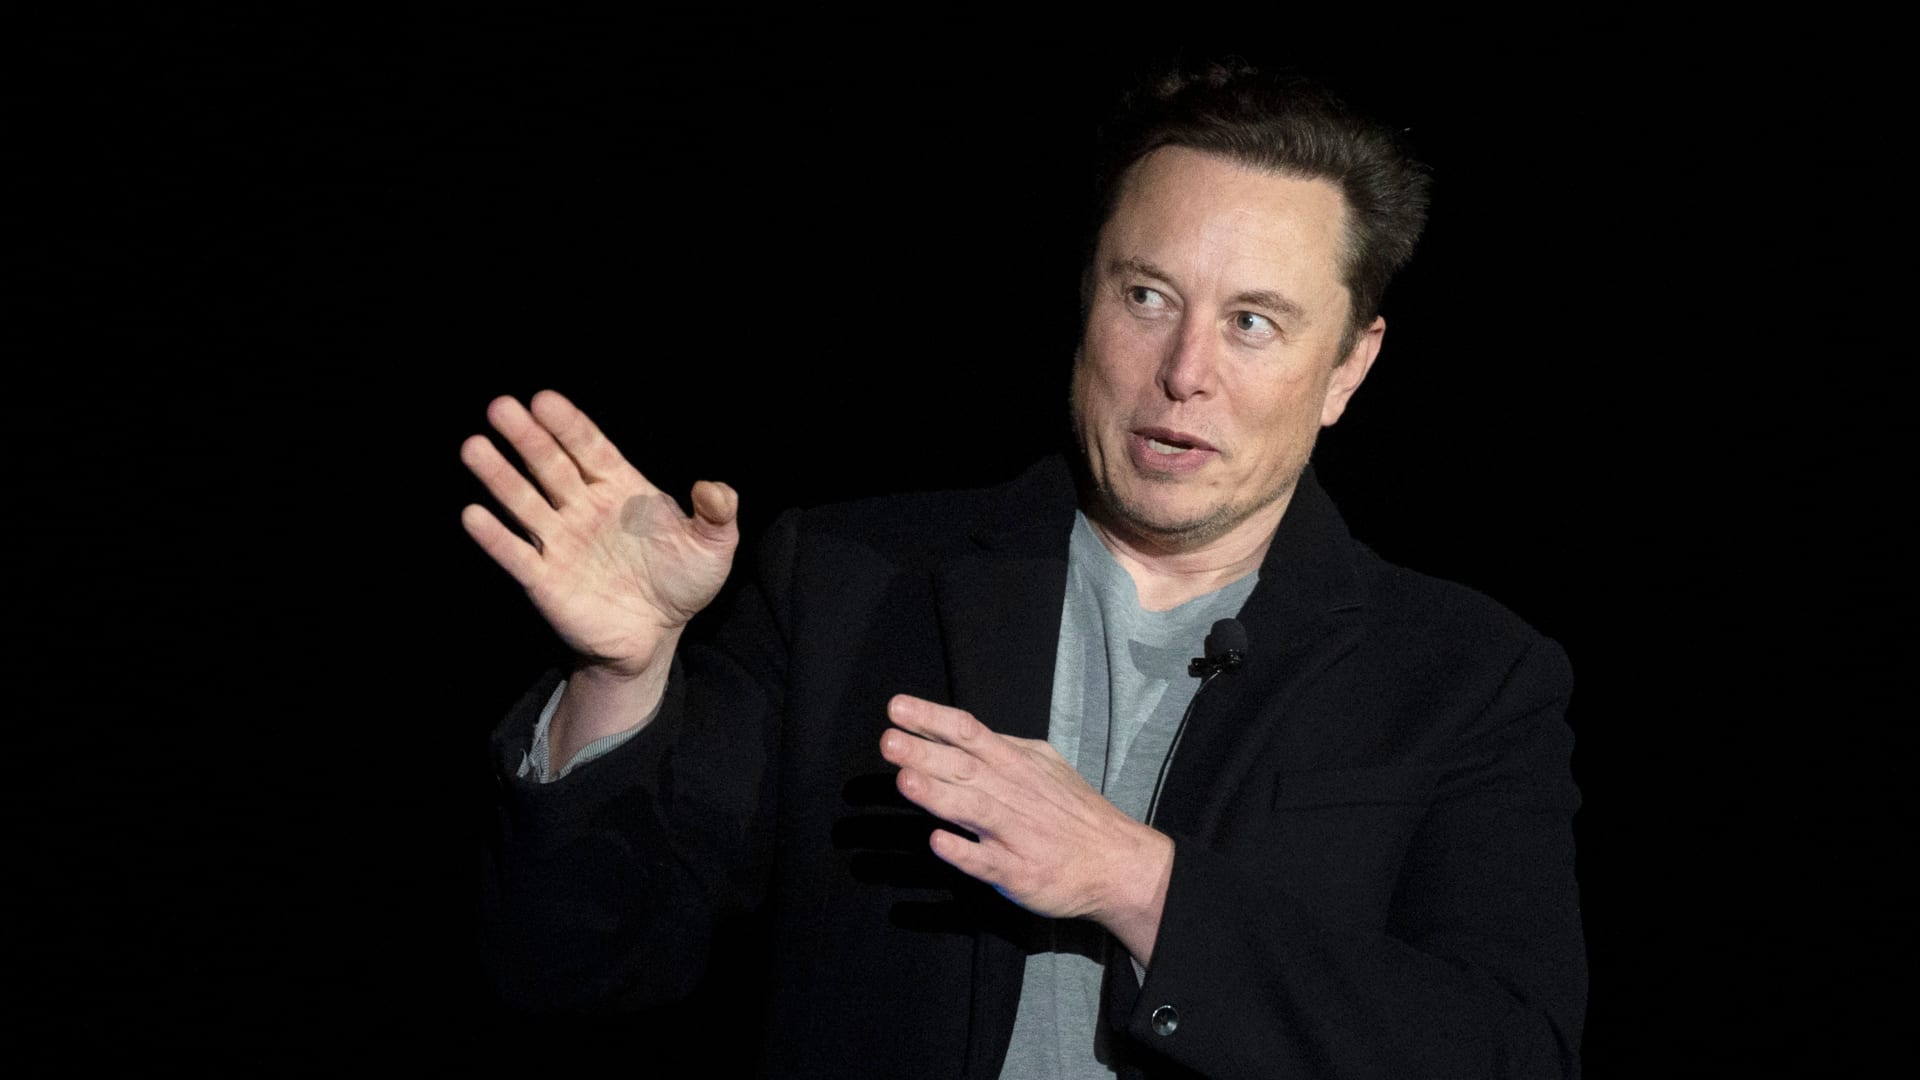 Elon Musk's investment in Twitter comes after he said he was considering building a new social media platform.